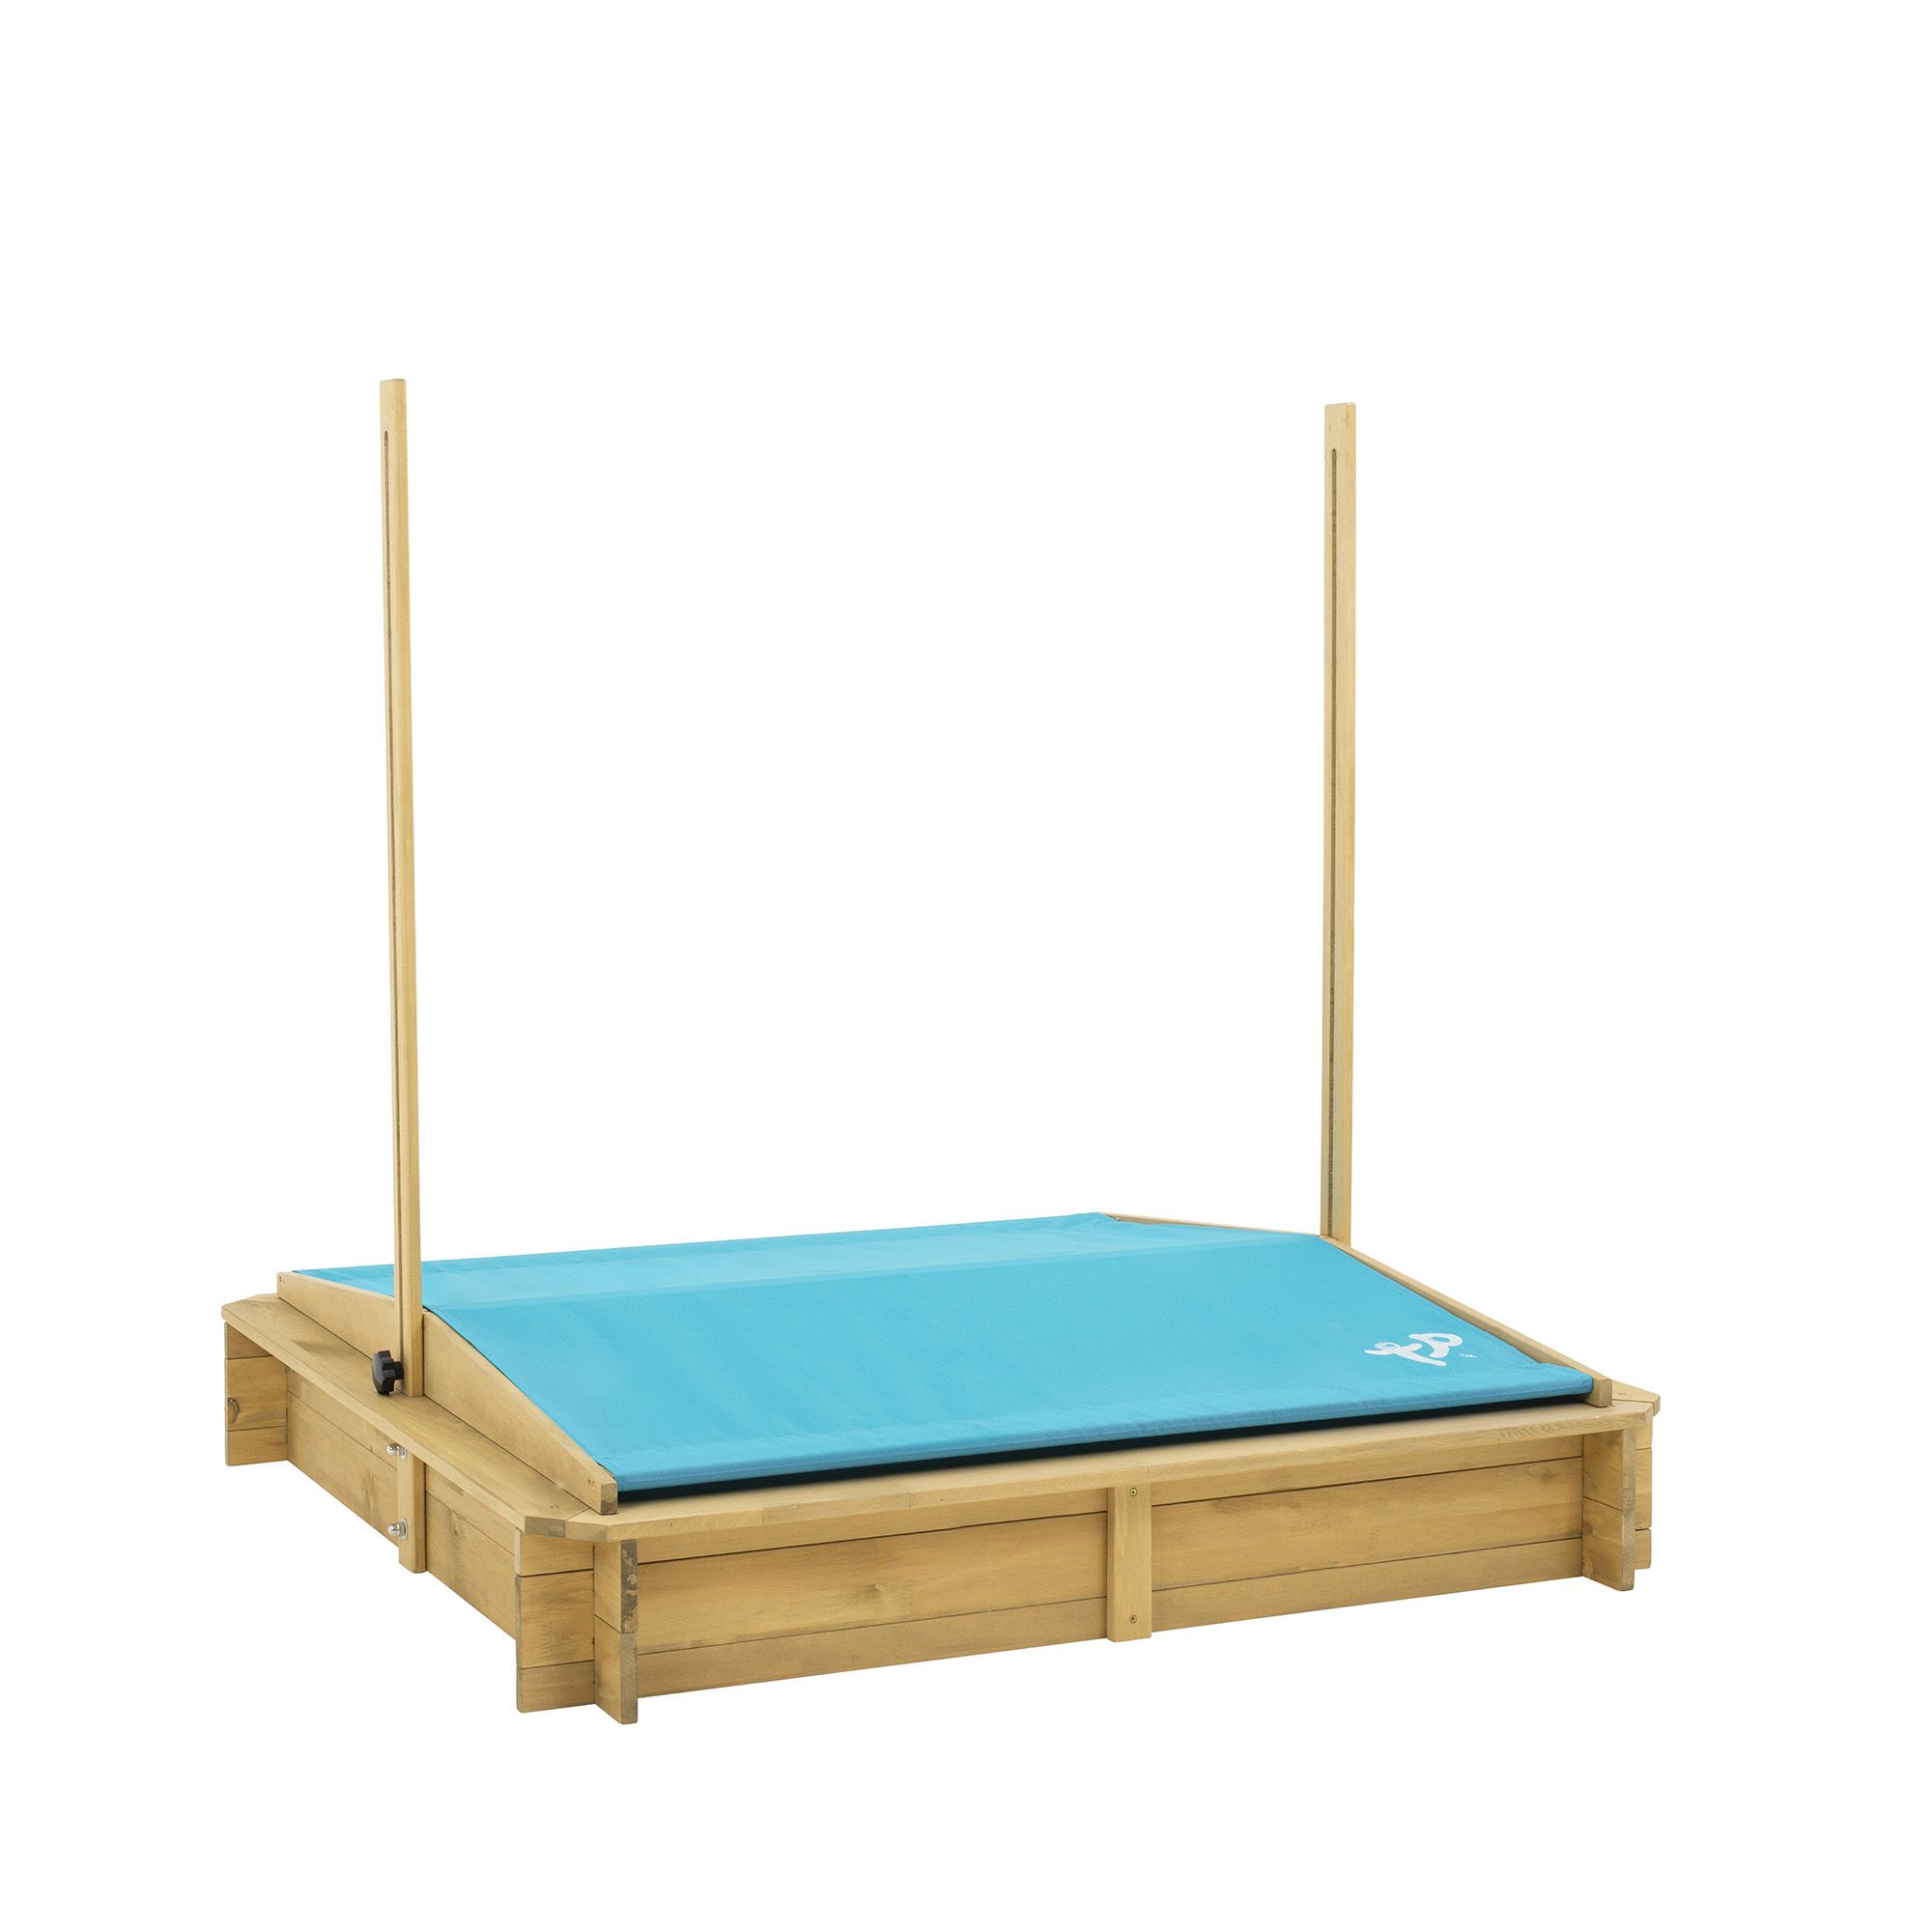 TP Toys Timber Rectangular Sand pit, Pack of 1 with Canopy